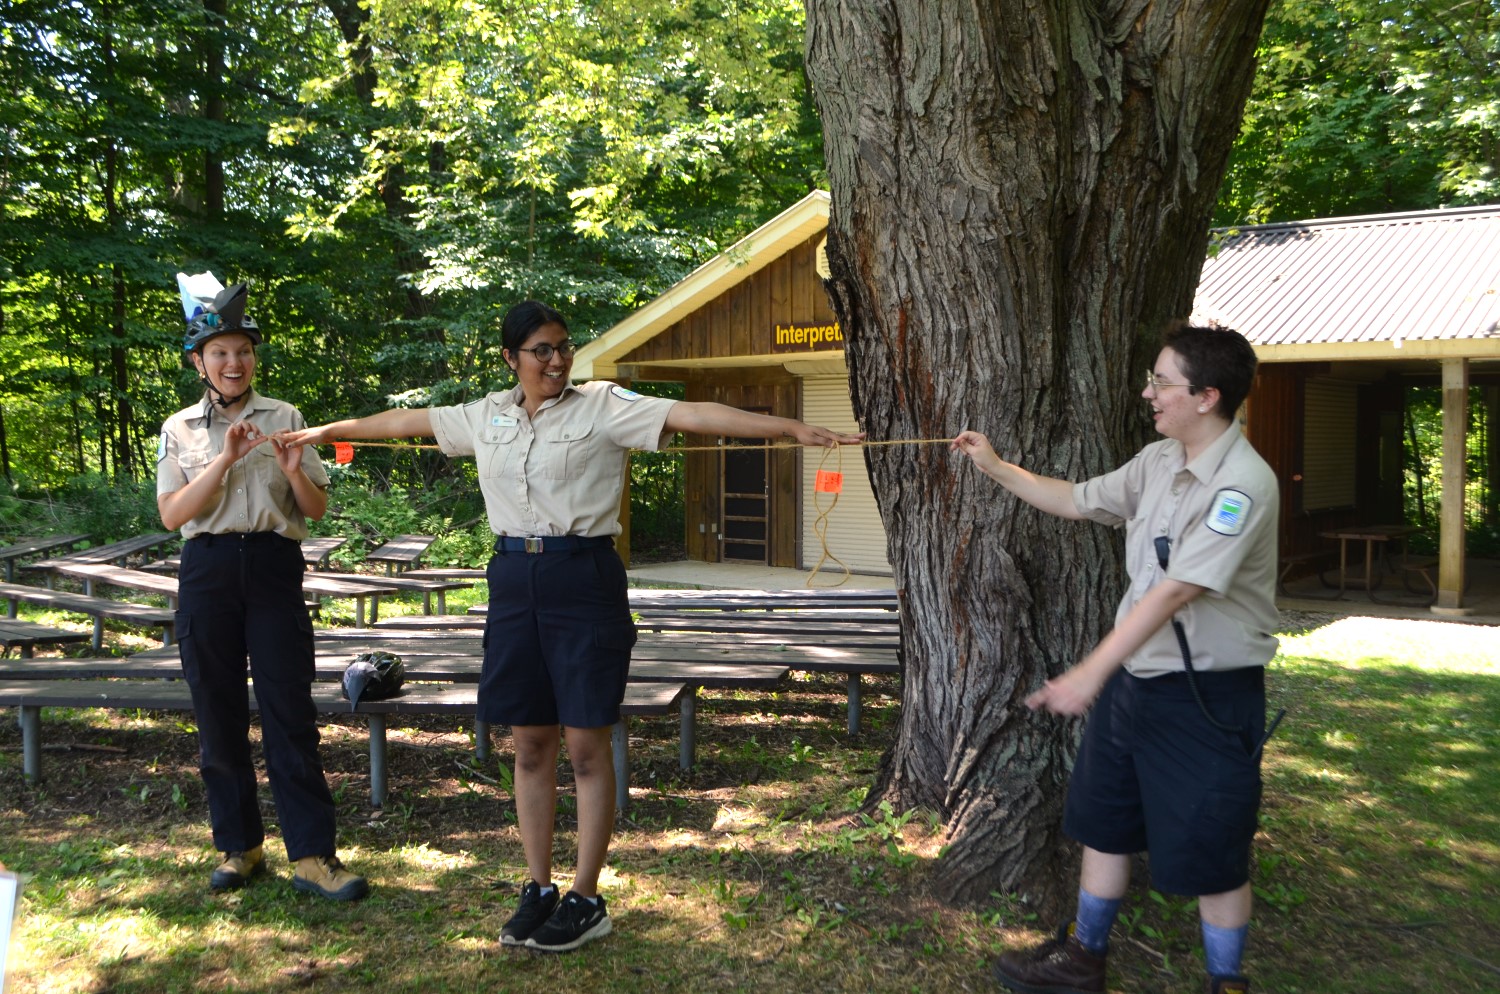 Three Ontario Parks staff standing in a line. The middle person holding their arms out at shoulder height and the other two are using rope to measure her arm span.